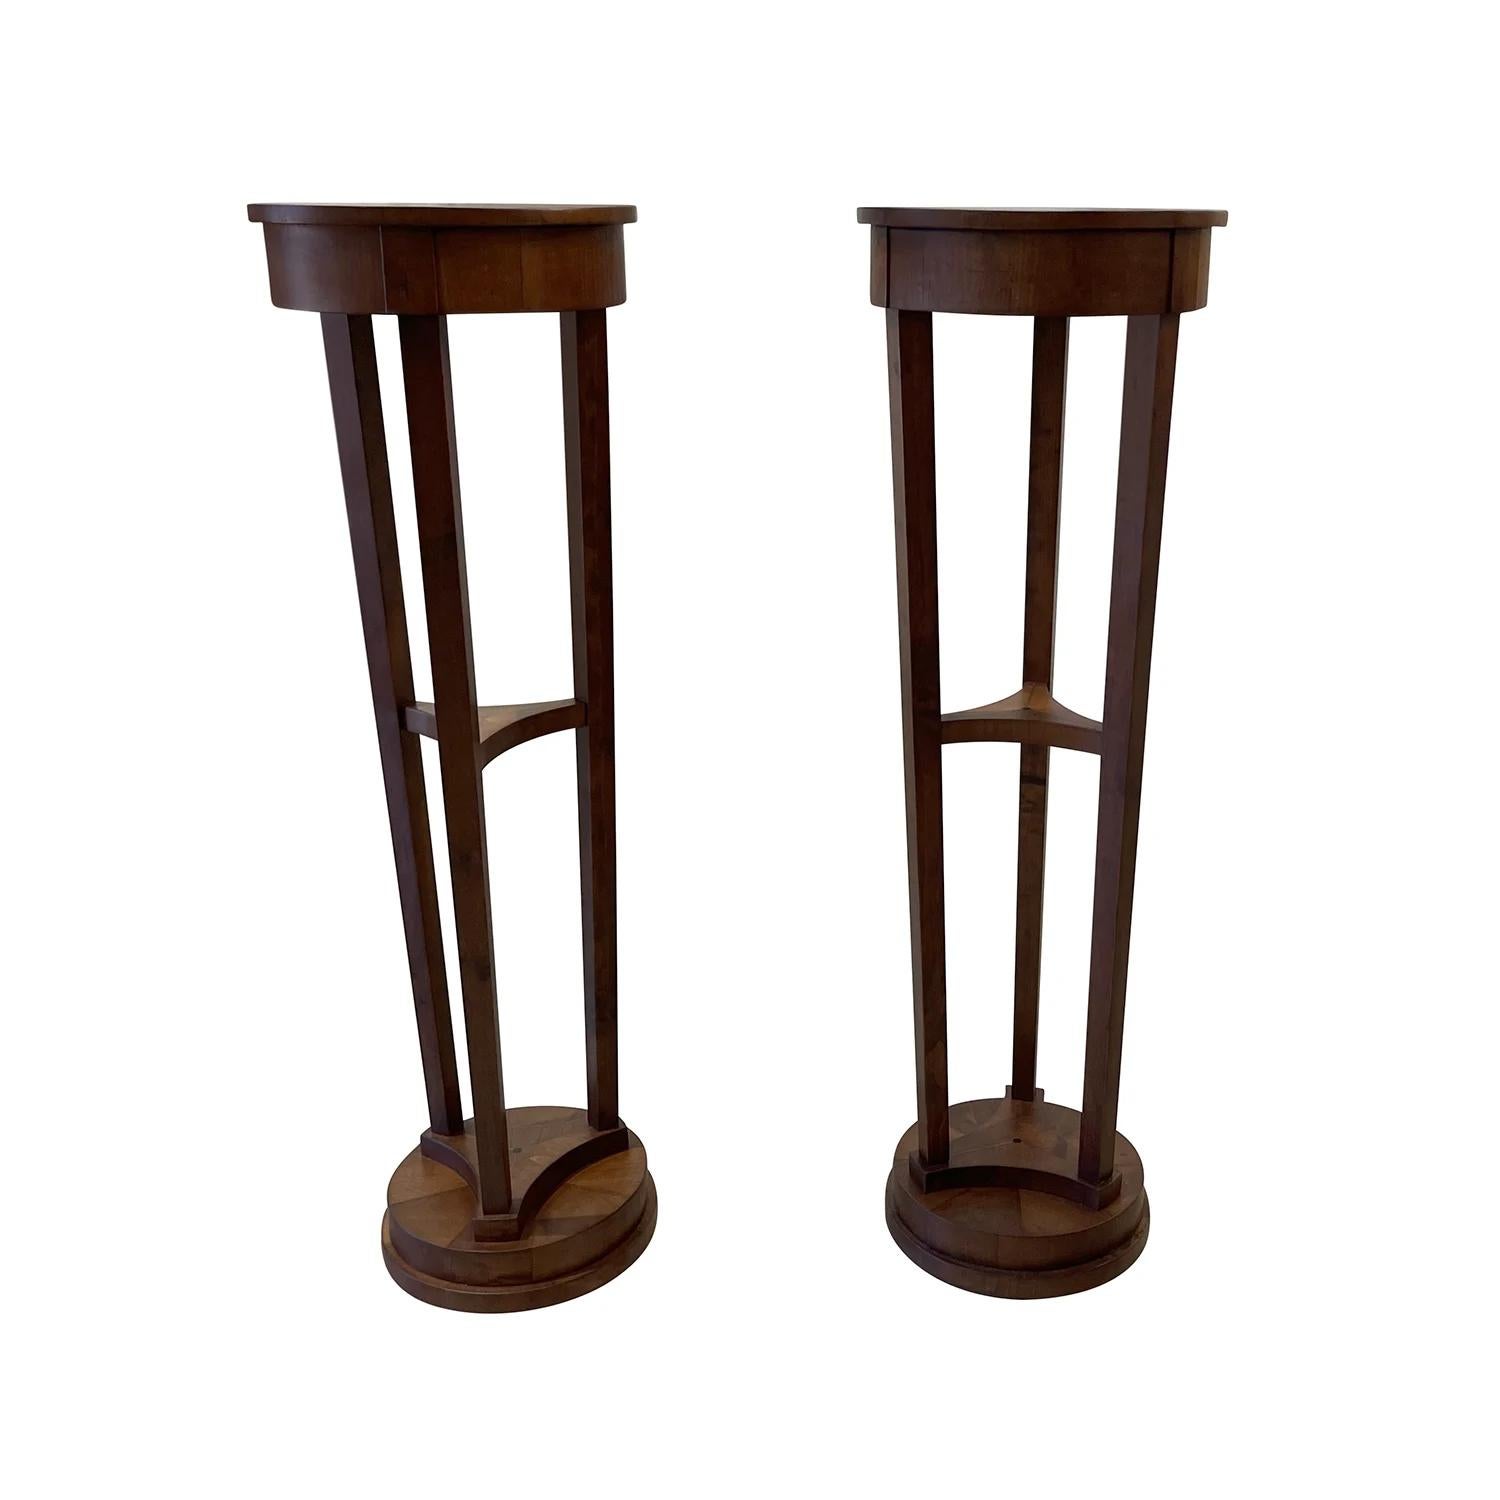 Biedermeier 19th Century French Empire Pair of Antique Polished Mahogany Pedestals For Sale